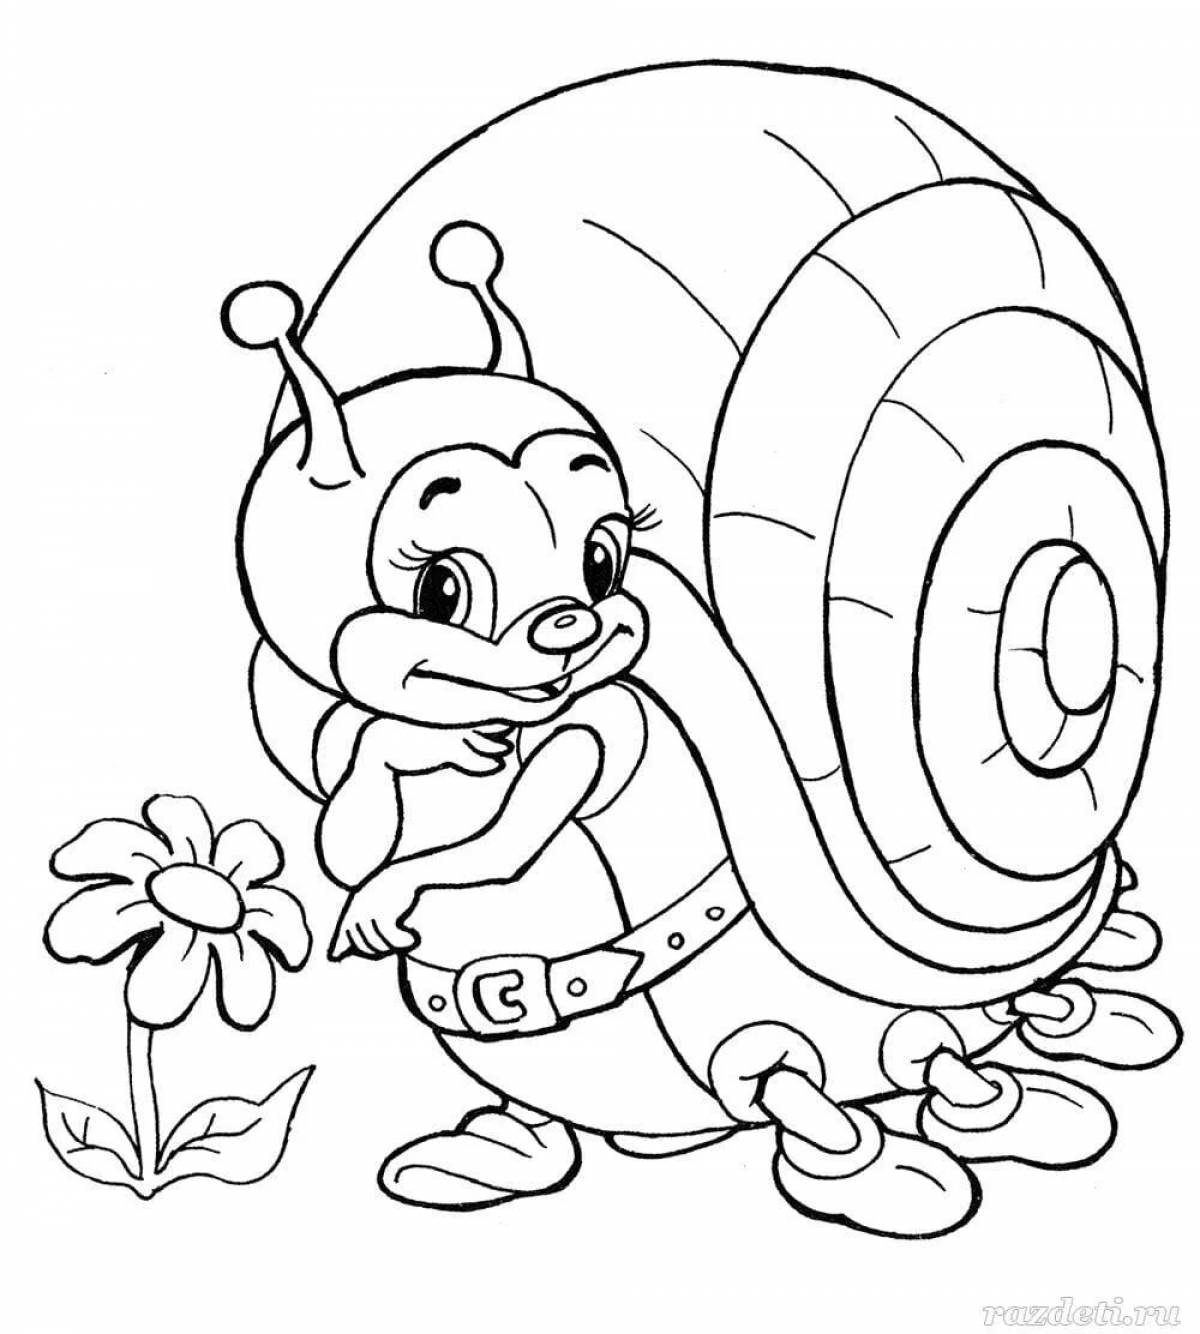 Funny snail coloring book for 3-4 year olds